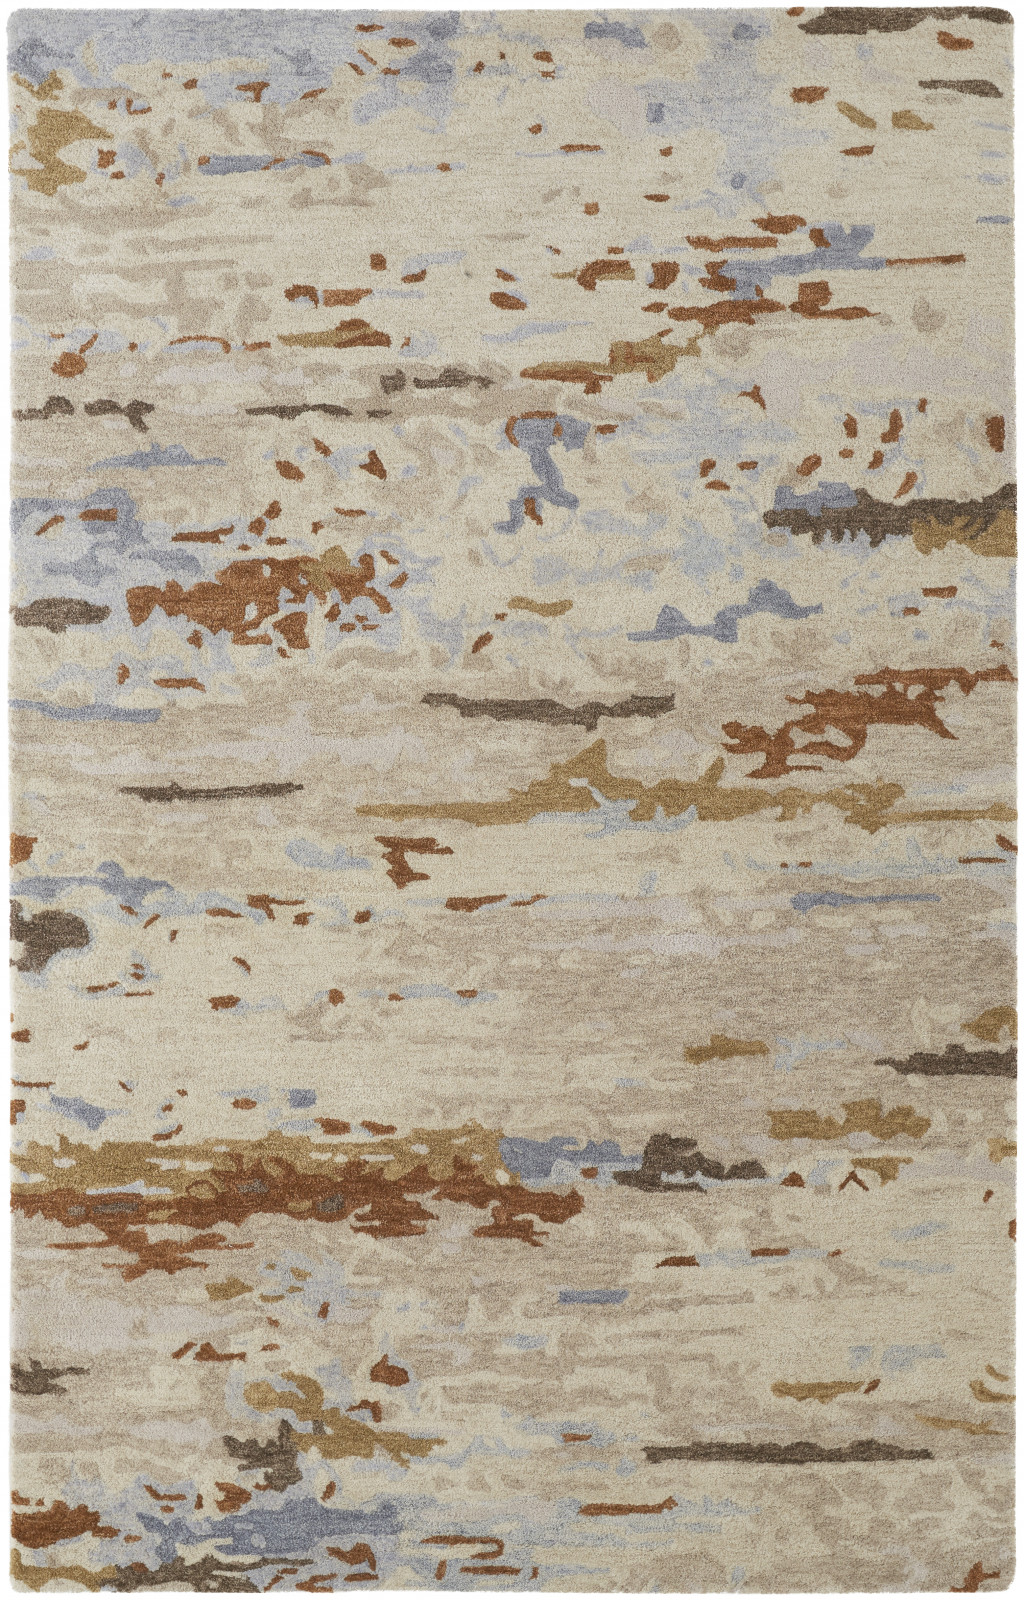 2' X 3' Ivory Blue And Brown Wool Abstract Tufted Handmade Stain Resistant Area Rug-513627-1